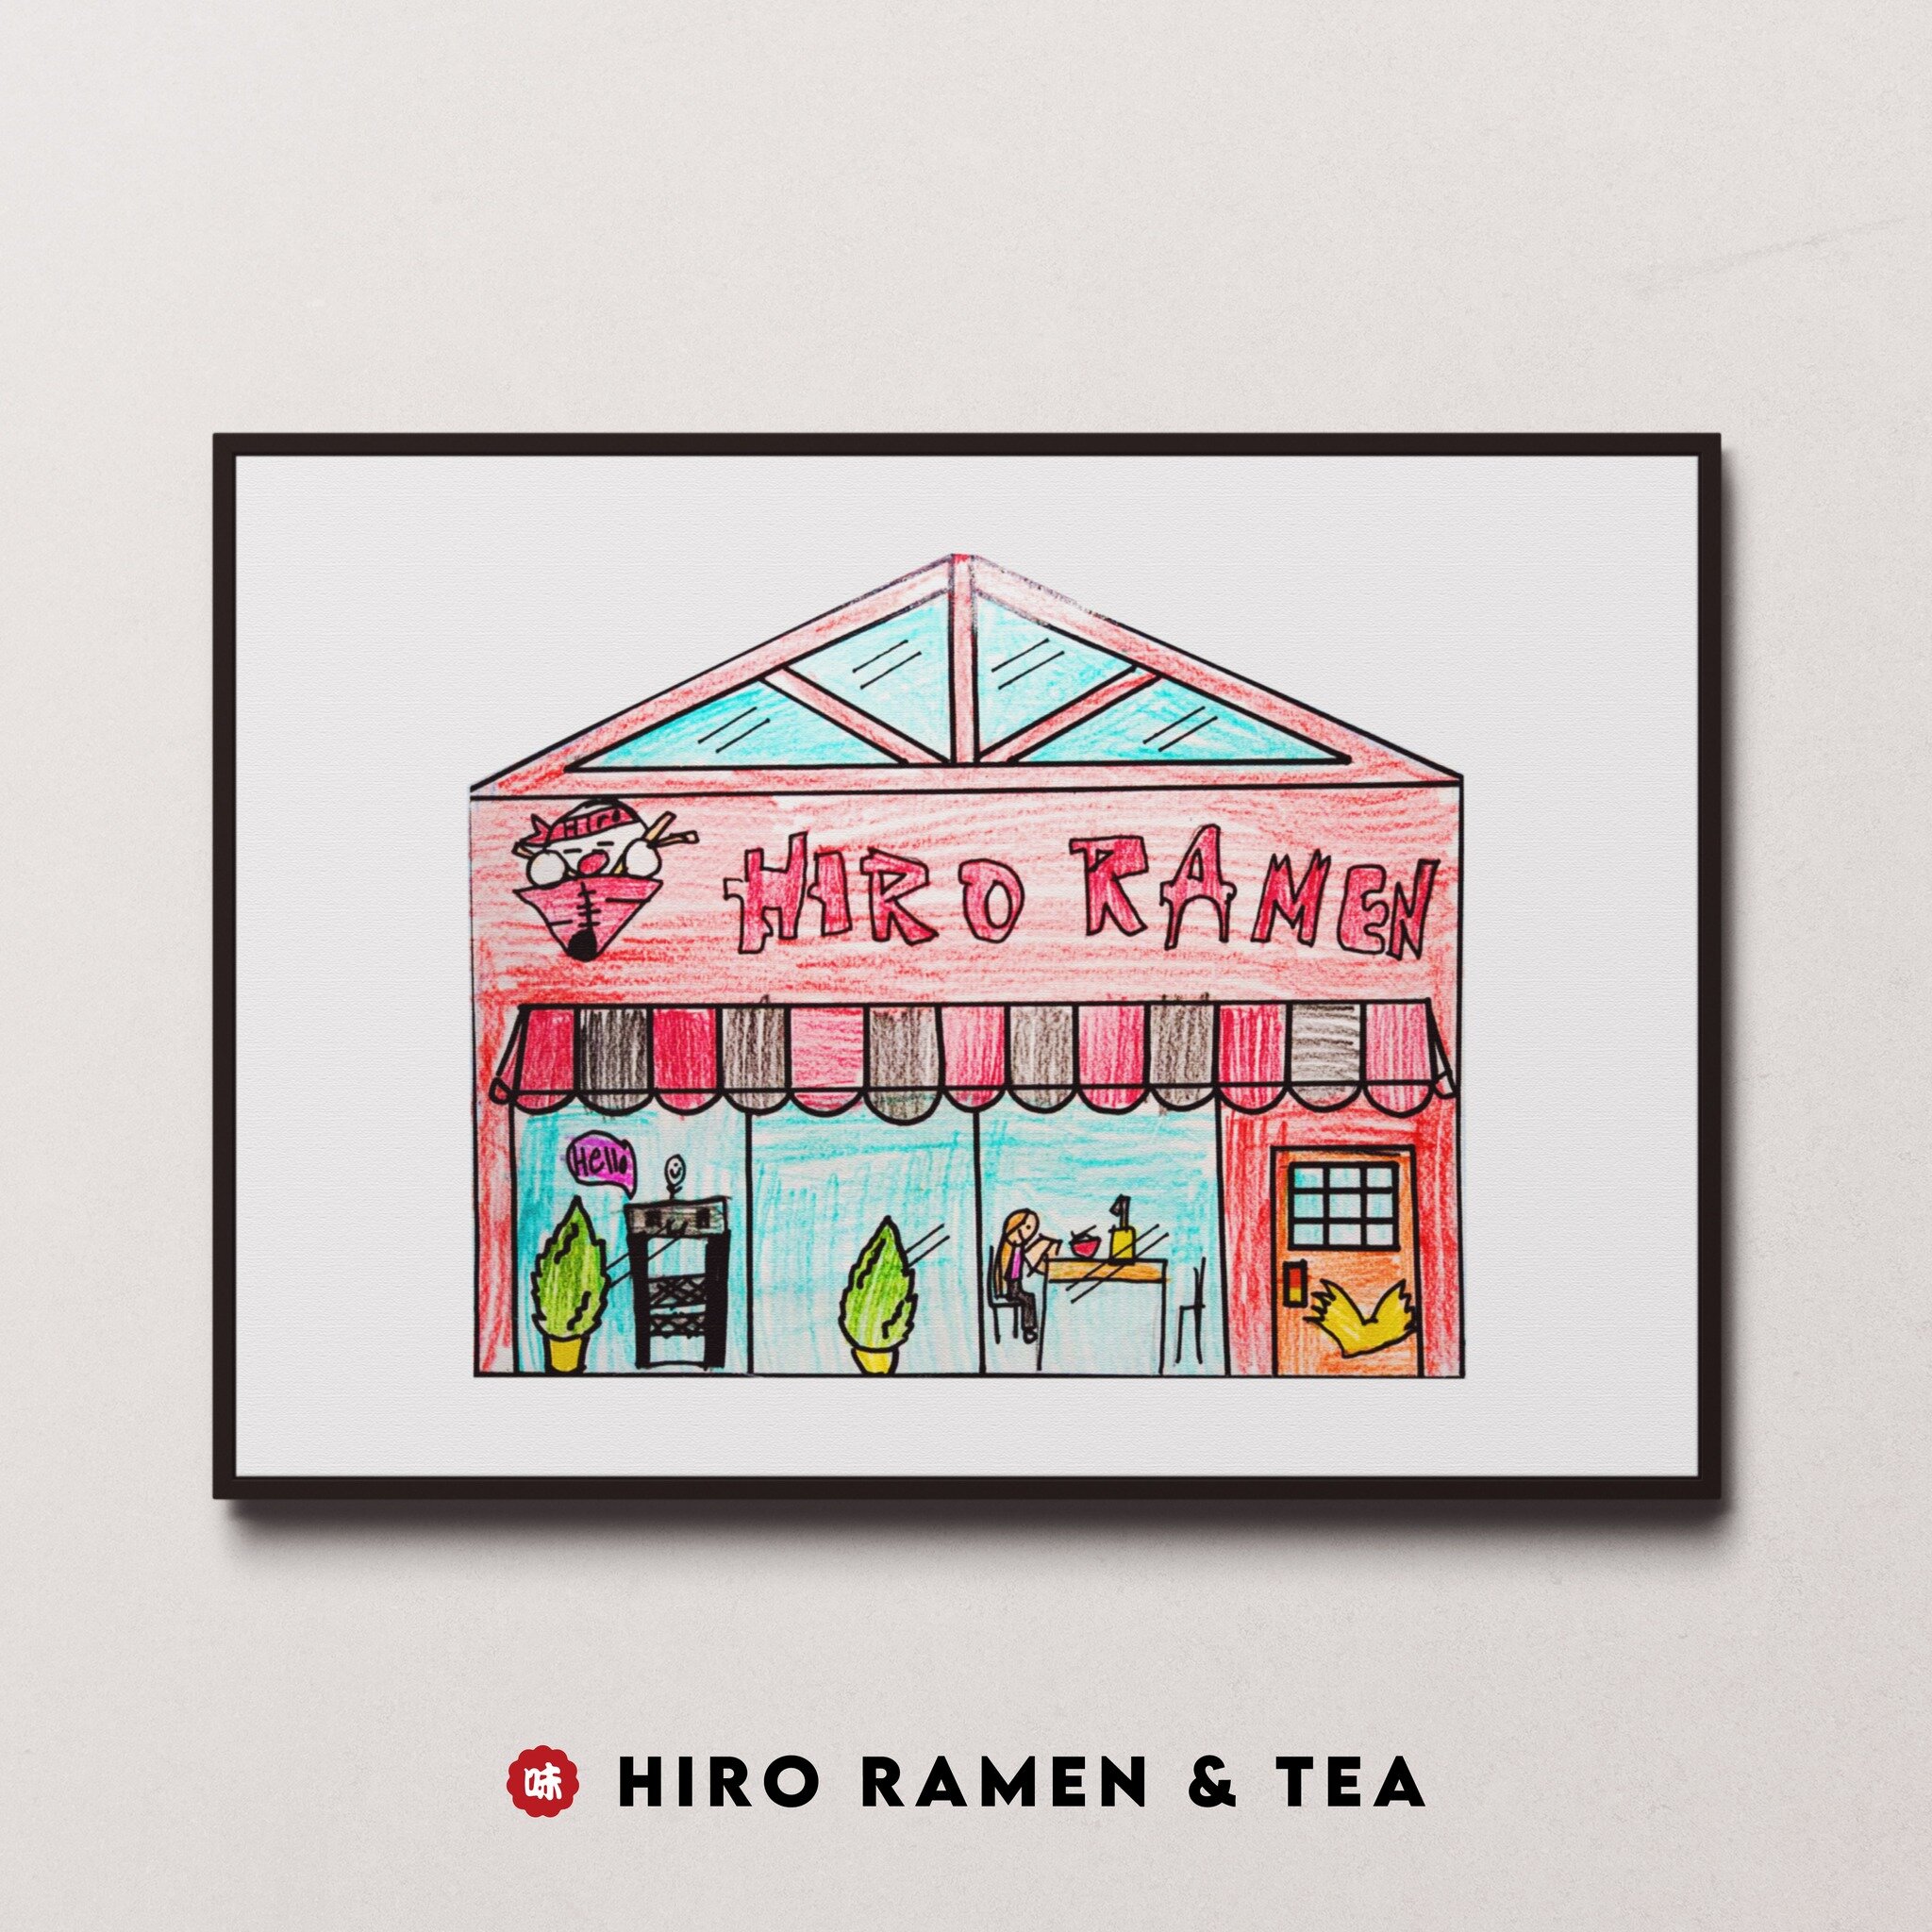 This weekend, we celebrate our 2 year anniversary at Hiro Ramen &amp; Tea! We are so grateful to everyone who has visited and supported us from the neighborhood and beyond! One of our customer's shared that their daughter, Elsa, wrote a report on Hir